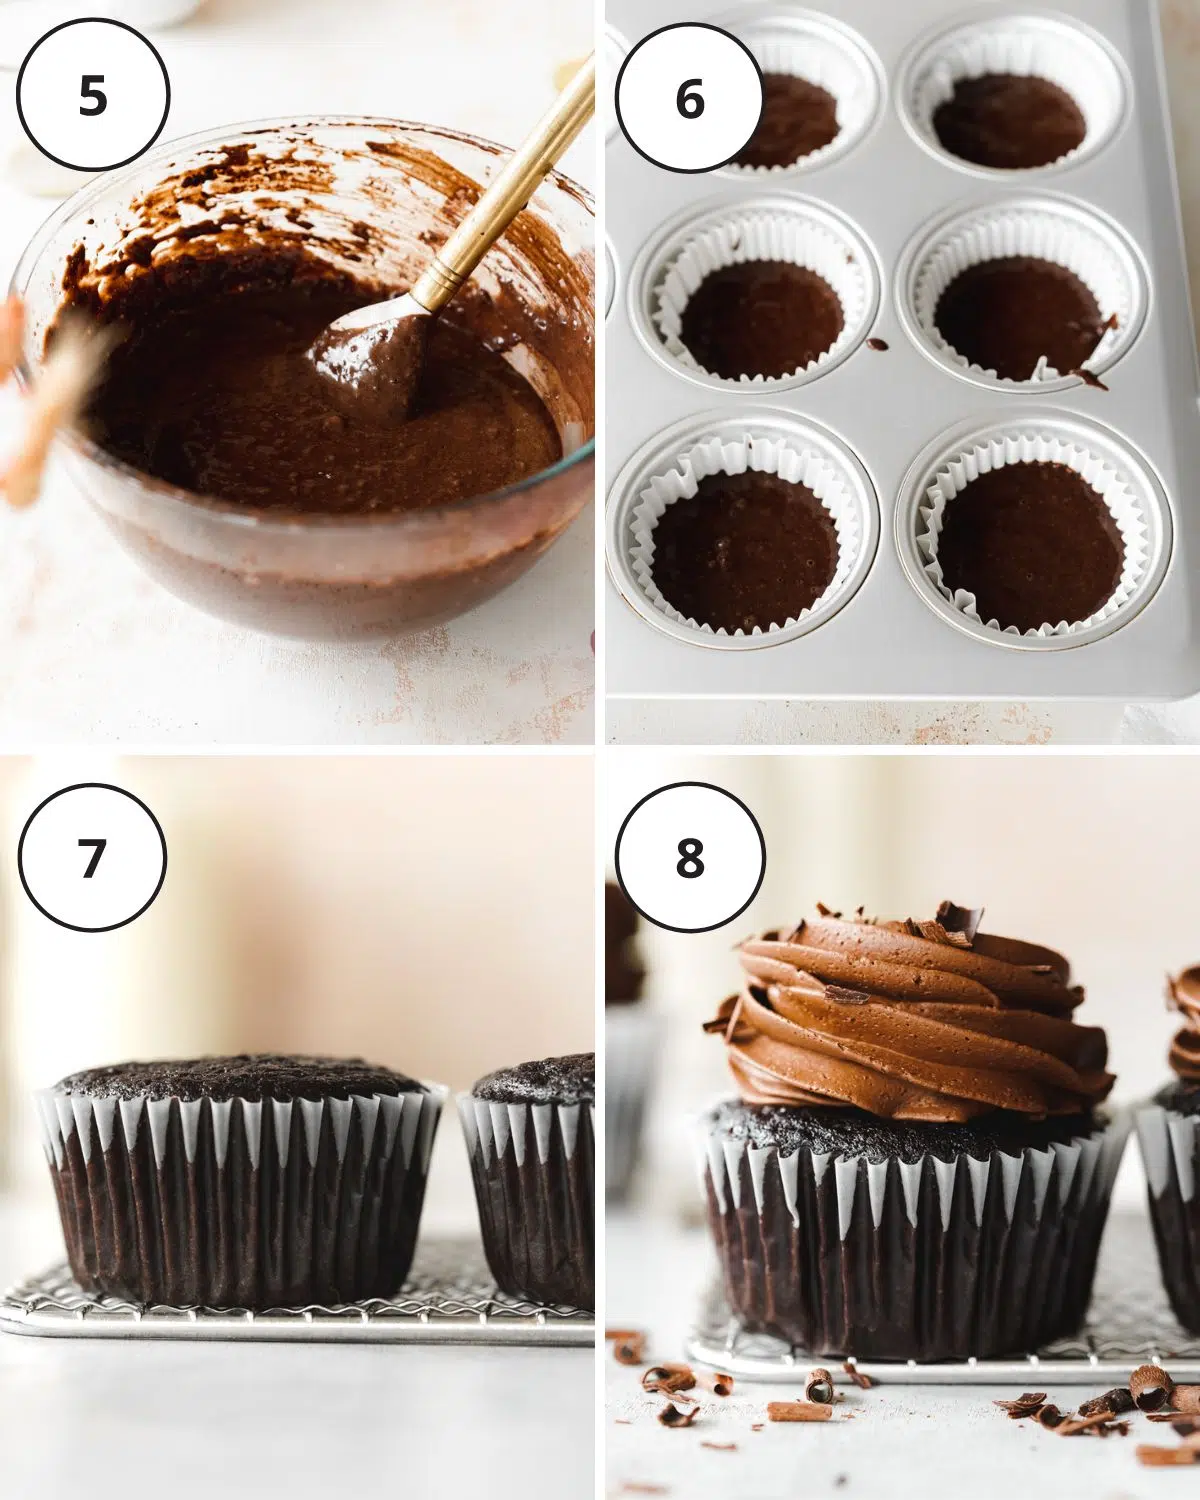 chocolate batter in a mixing bowl and in a muffin pan, and chocolate cupcakes with frosting on a wire rack.